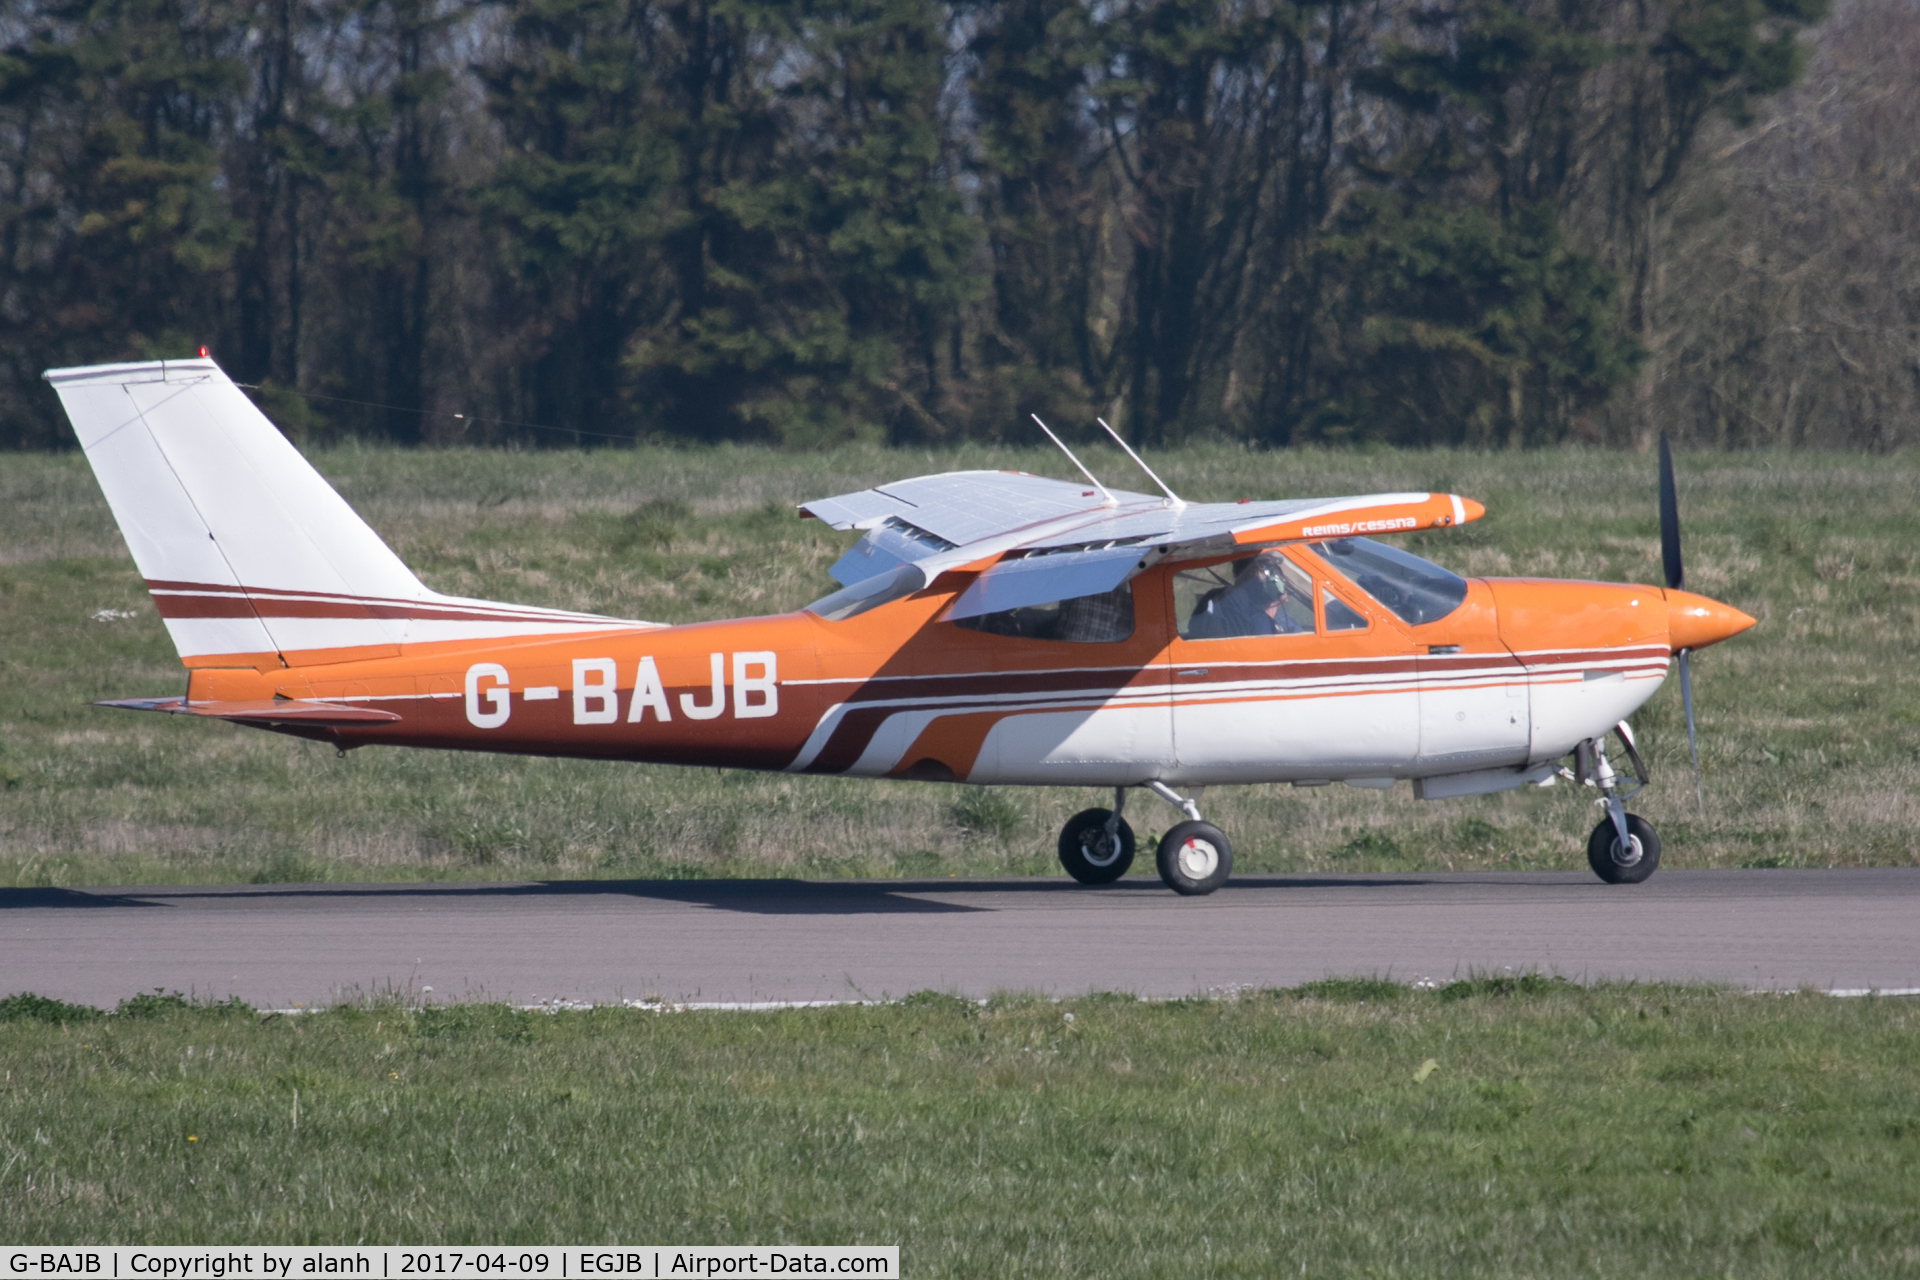 G-BAJB, 1973 Reims F177RG Cardinal RG C/N 0080, Rolling out at Guernsey